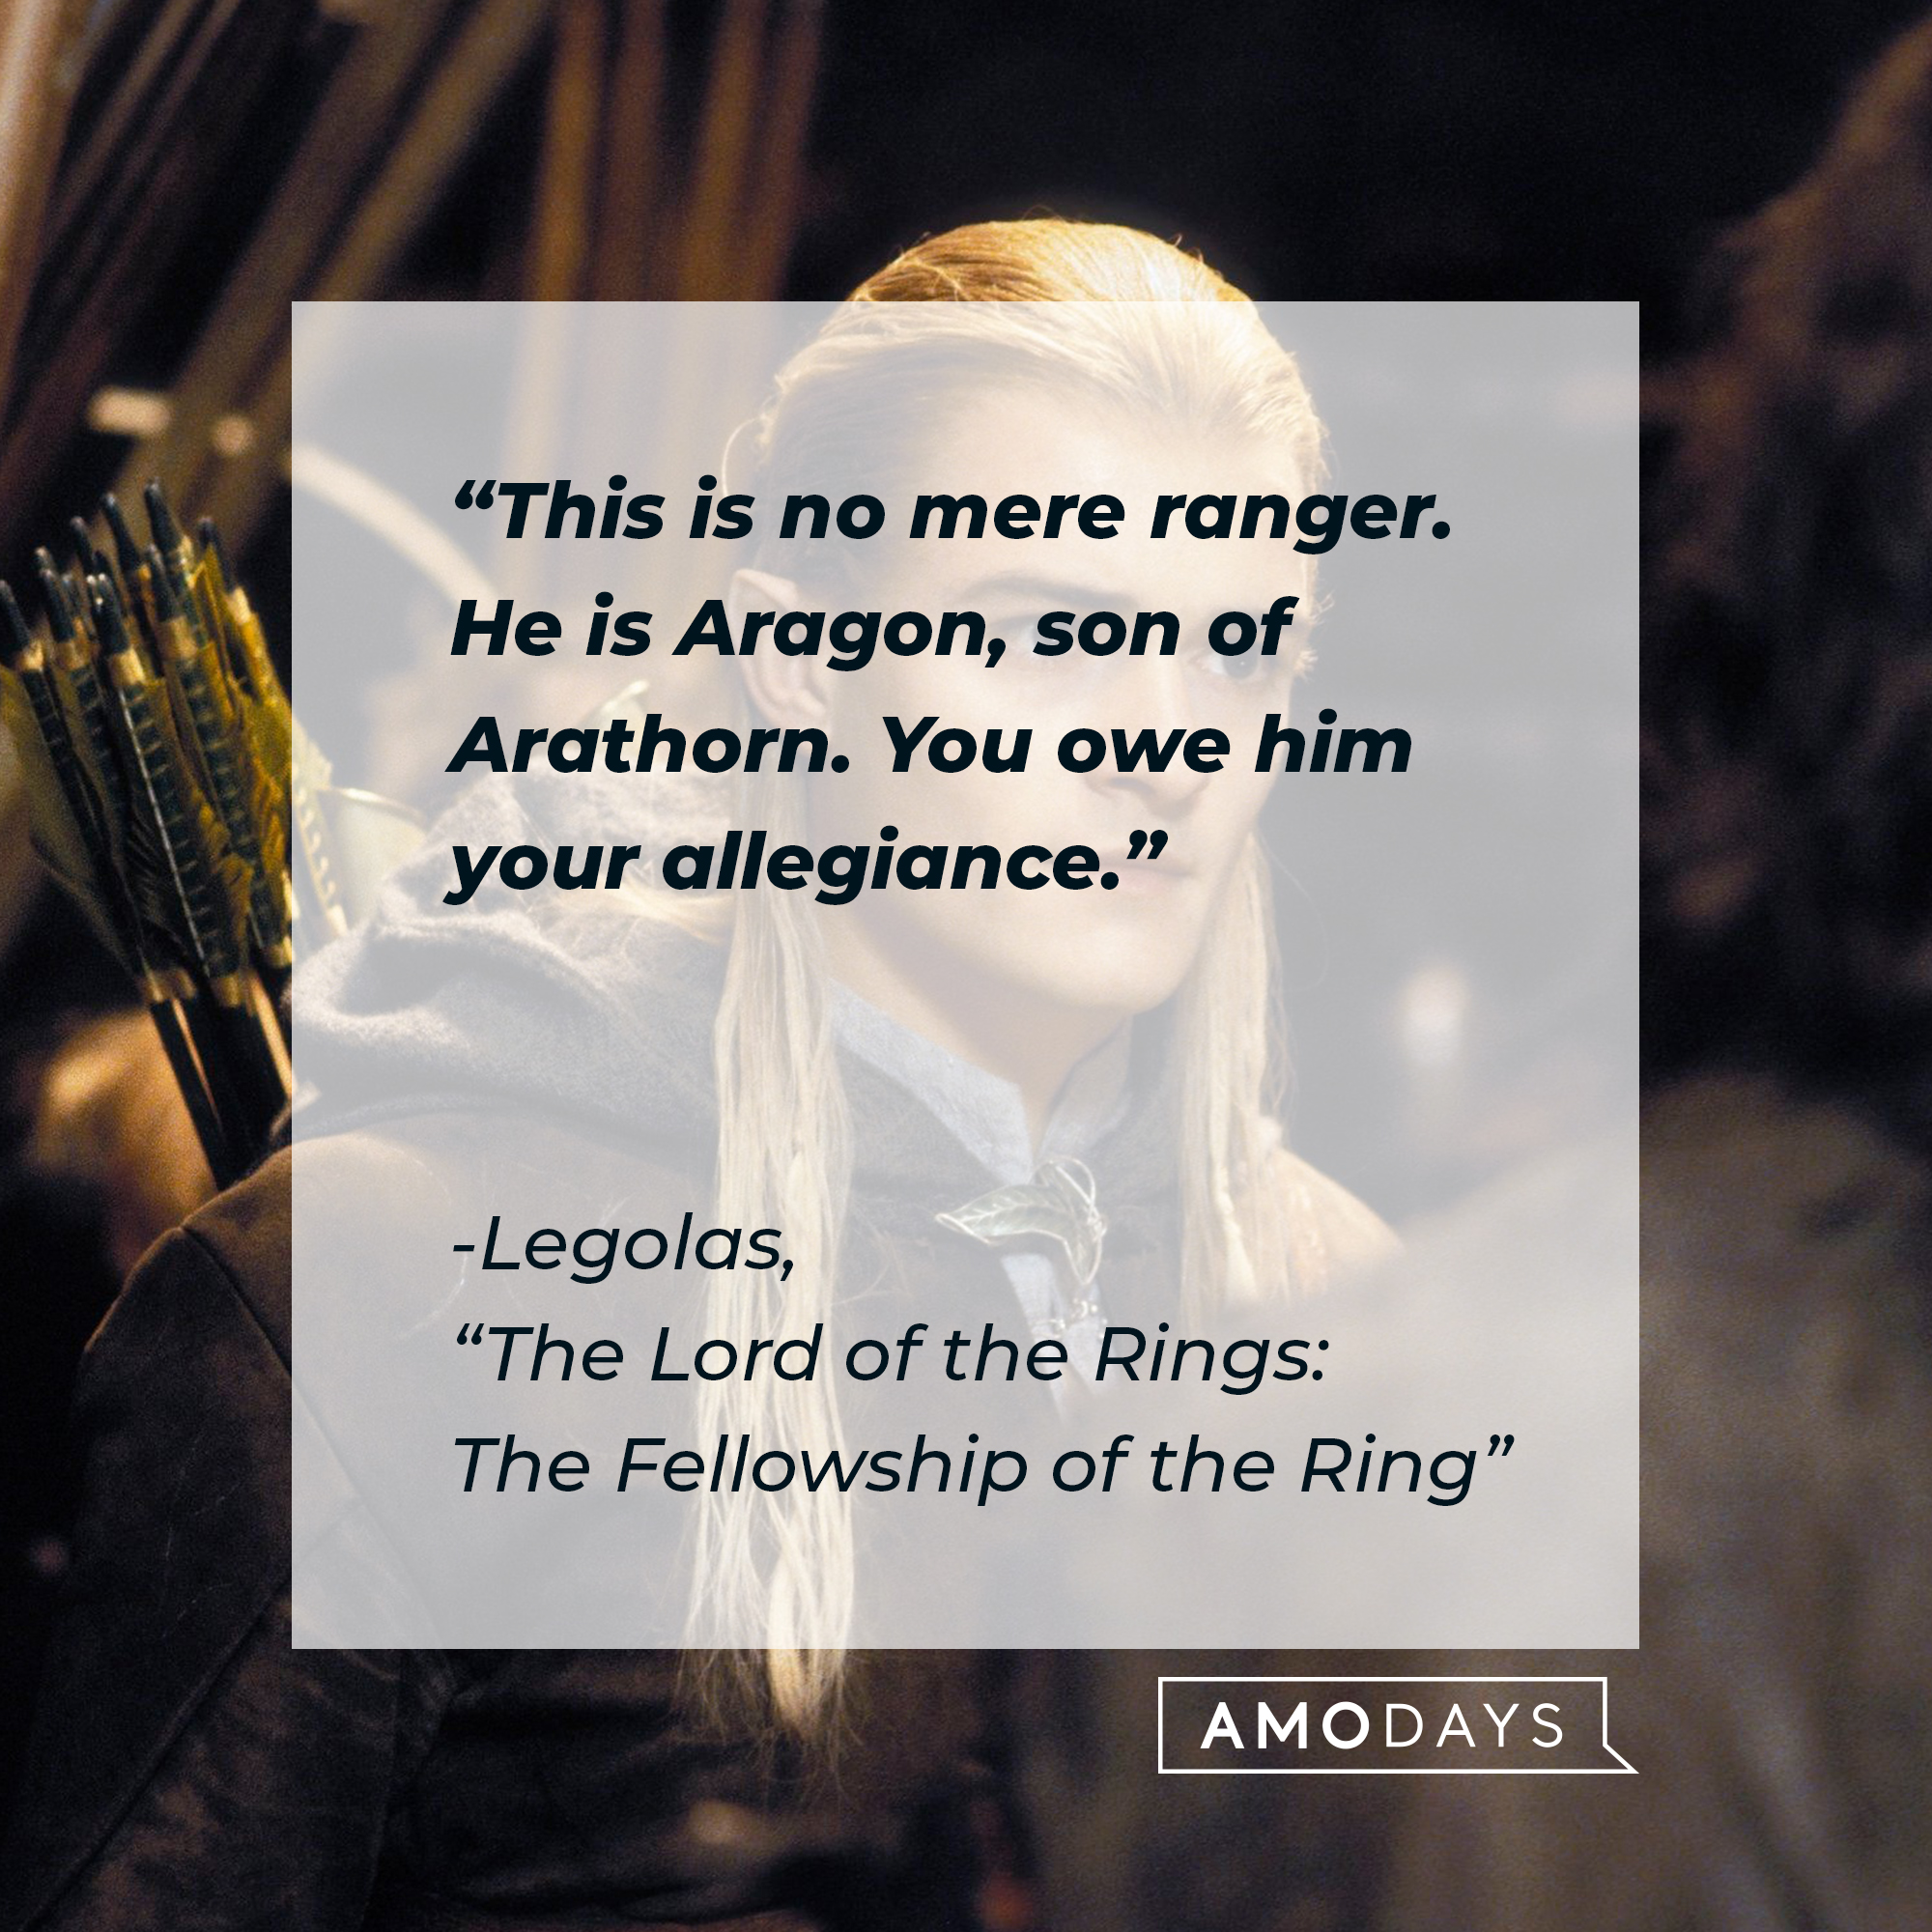 Legolas with his quote: "This is no mere ranger. He is Aragon, son of Arathorn. You owe him your allegiance."  | Source: Facebook.com/lordoftheringstrilogy